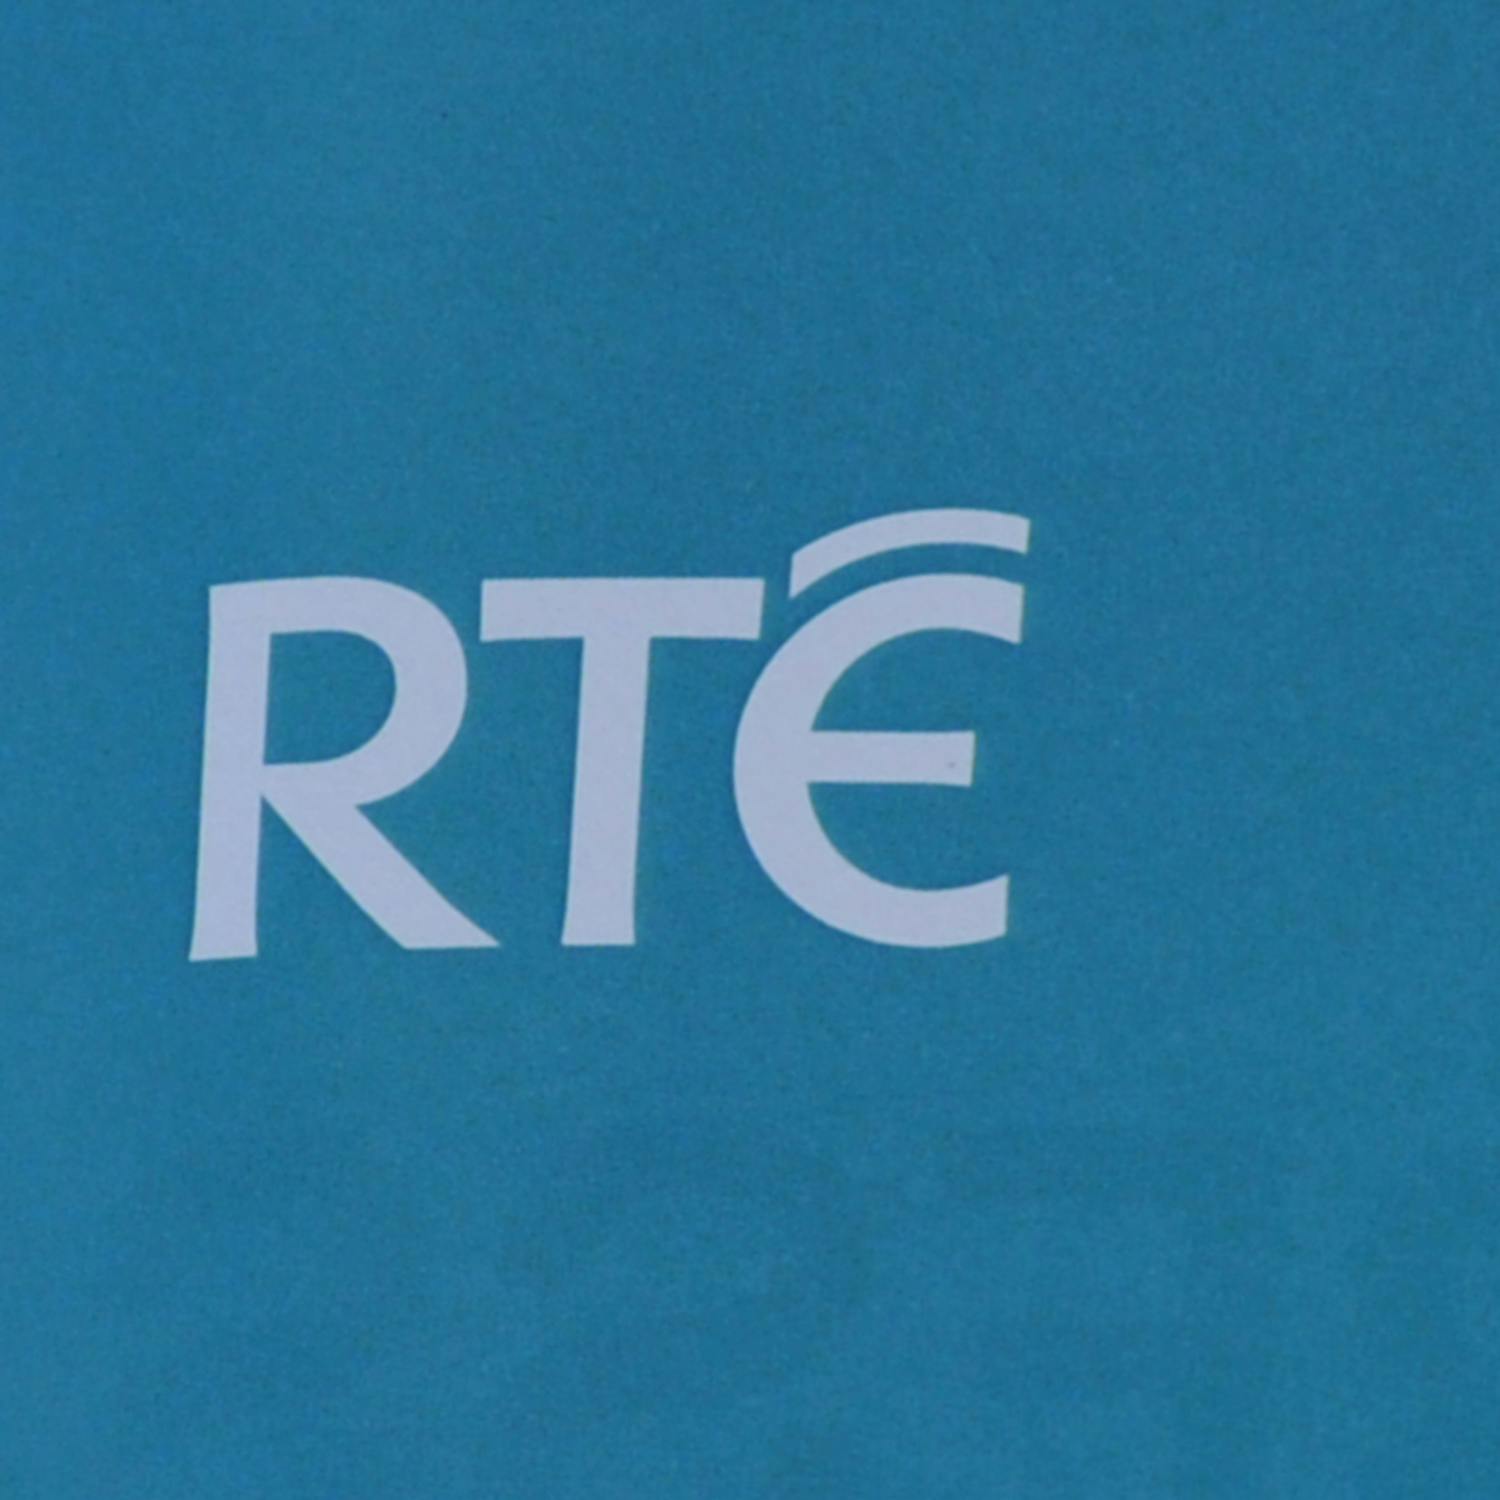 Multiple ‘compliance failings’ in RTÉ report finds